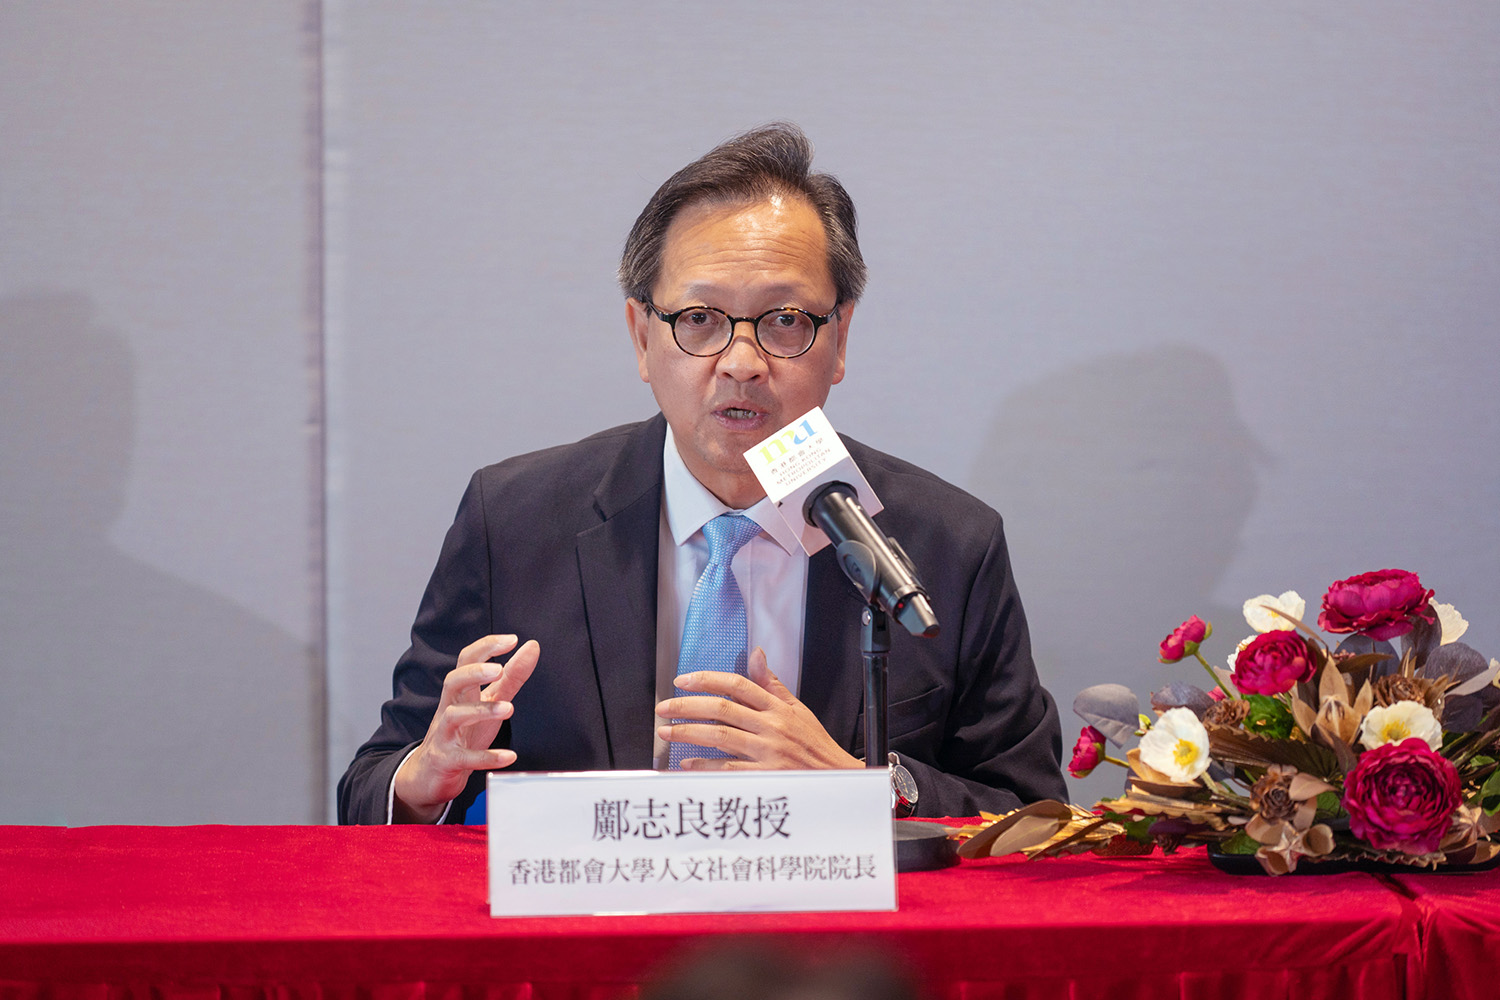 Prof. Charles Kwong Che-leung provides recommendations on pertinent policies.